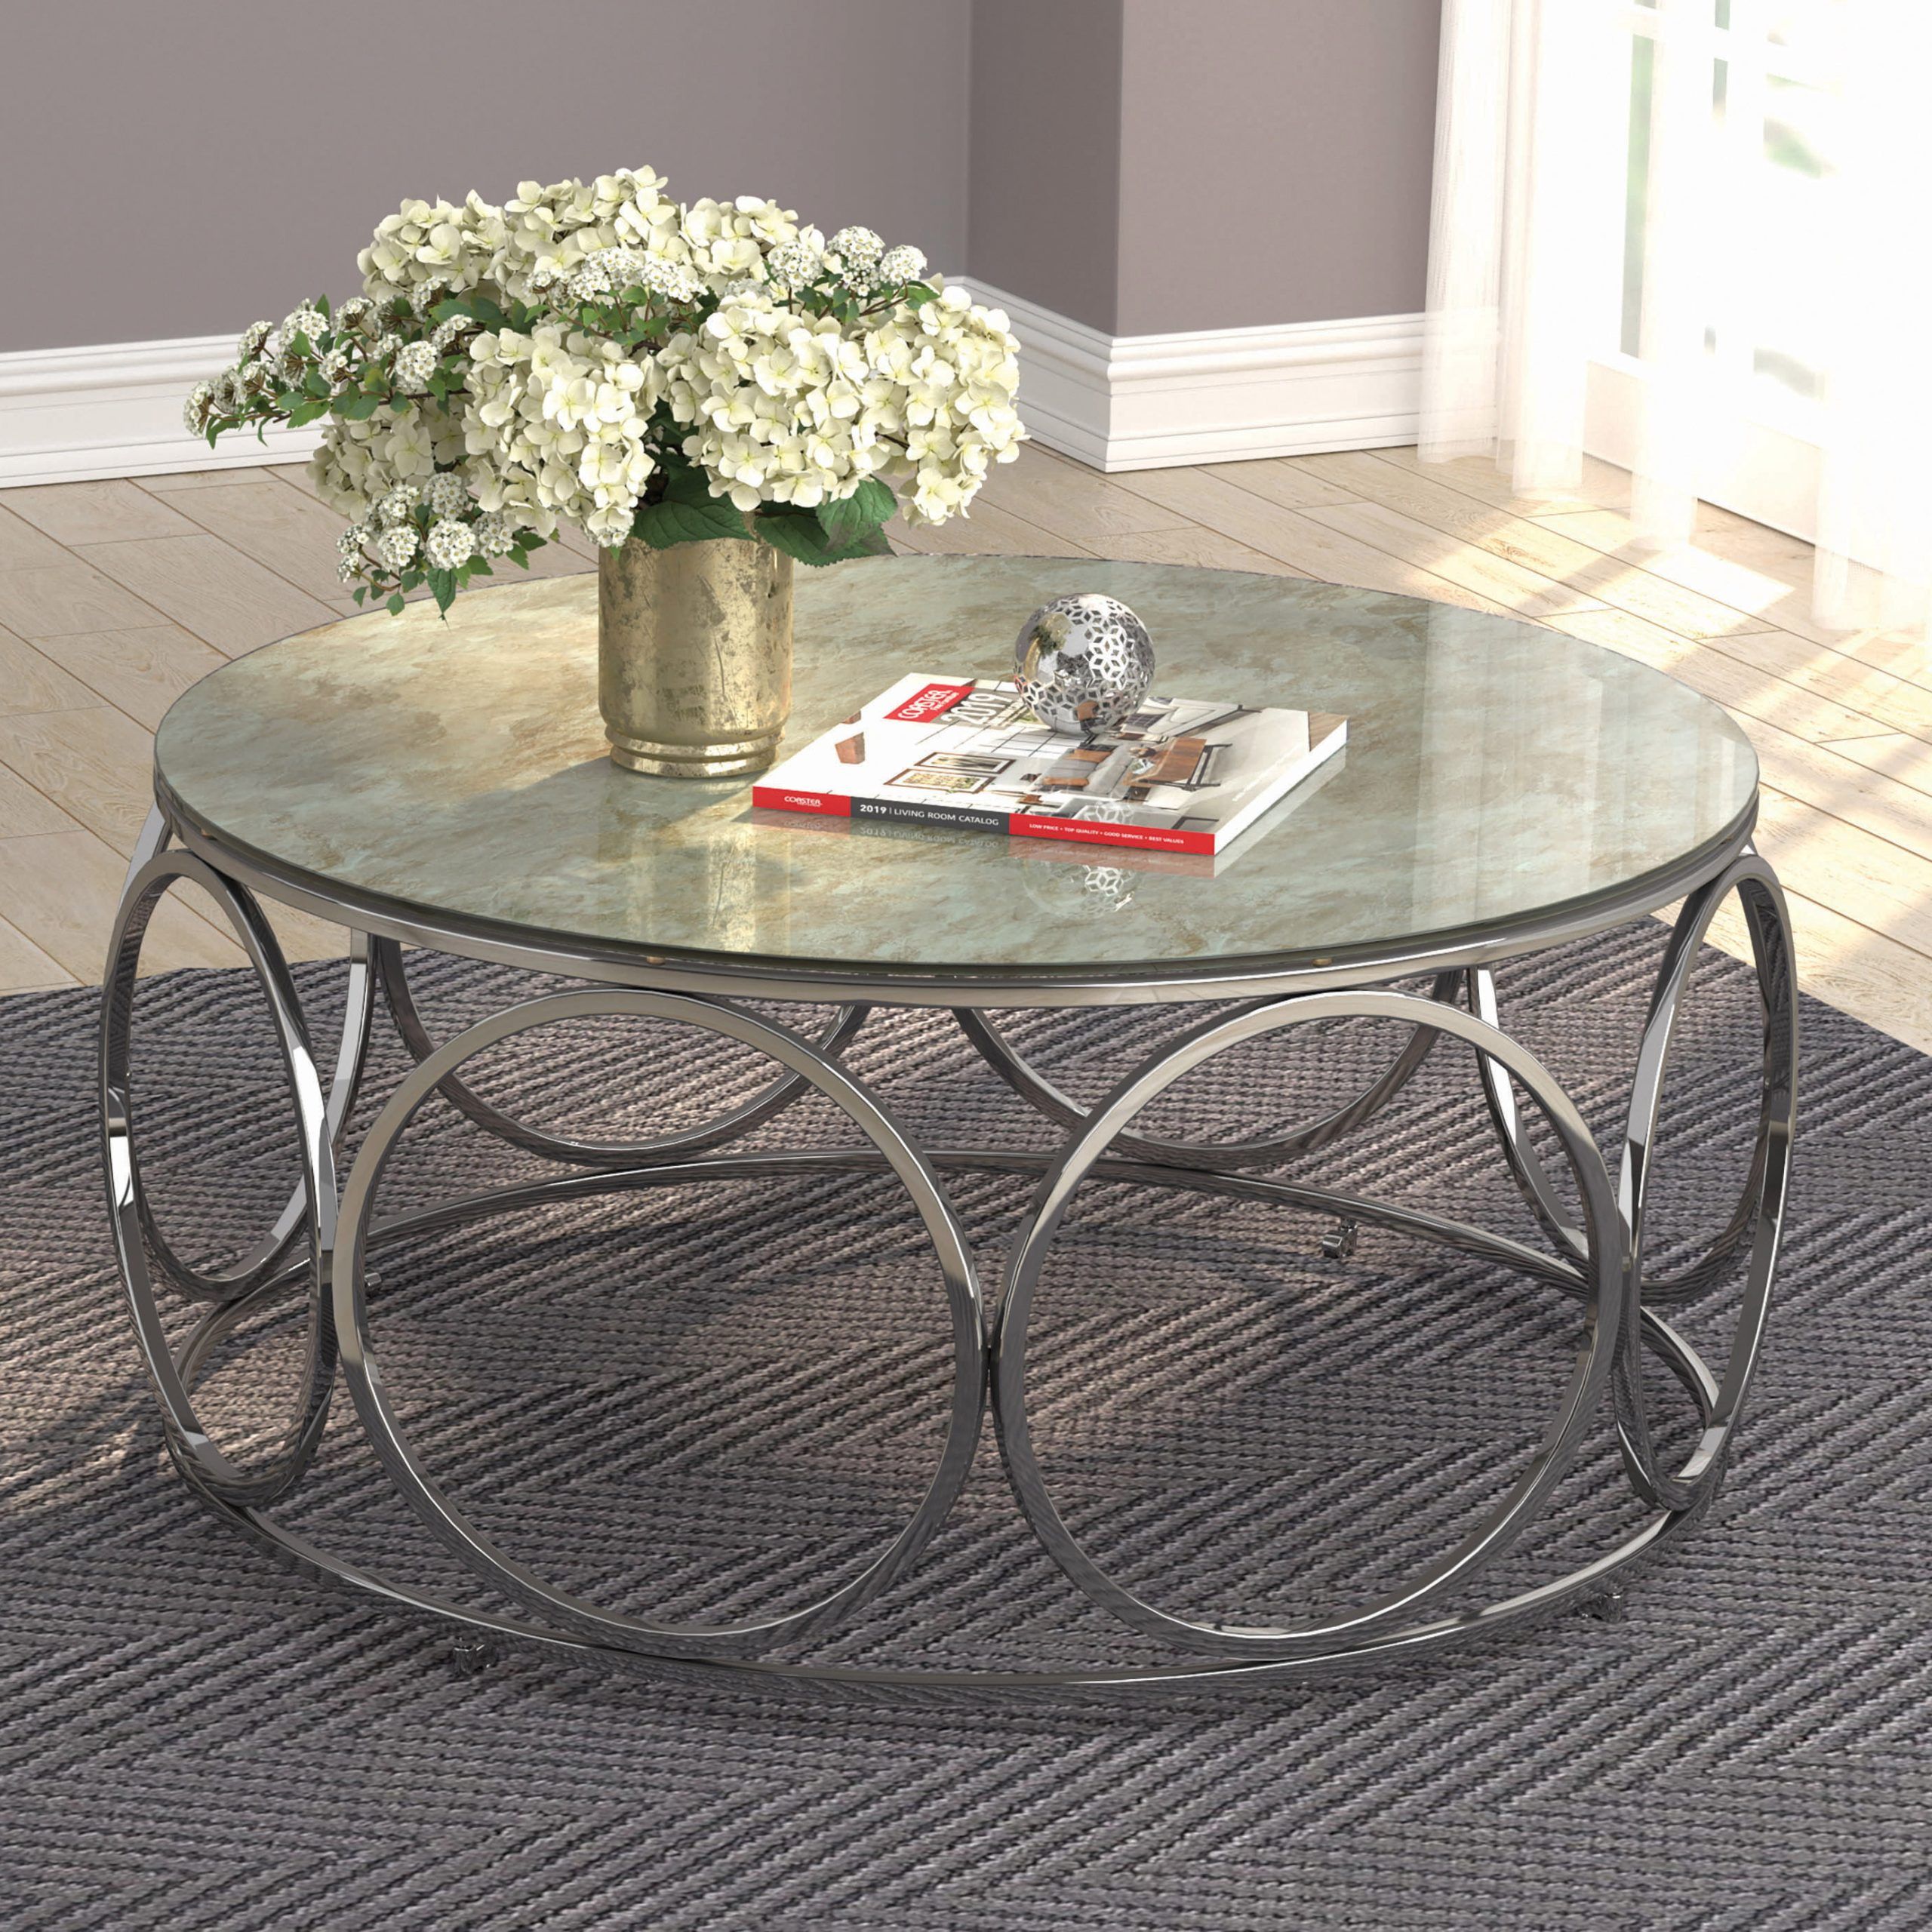 Round Coffee Table With Casters Beige Marble And Chrome – Walmart Within Round Coffee Tables (Gallery 8 of 20)